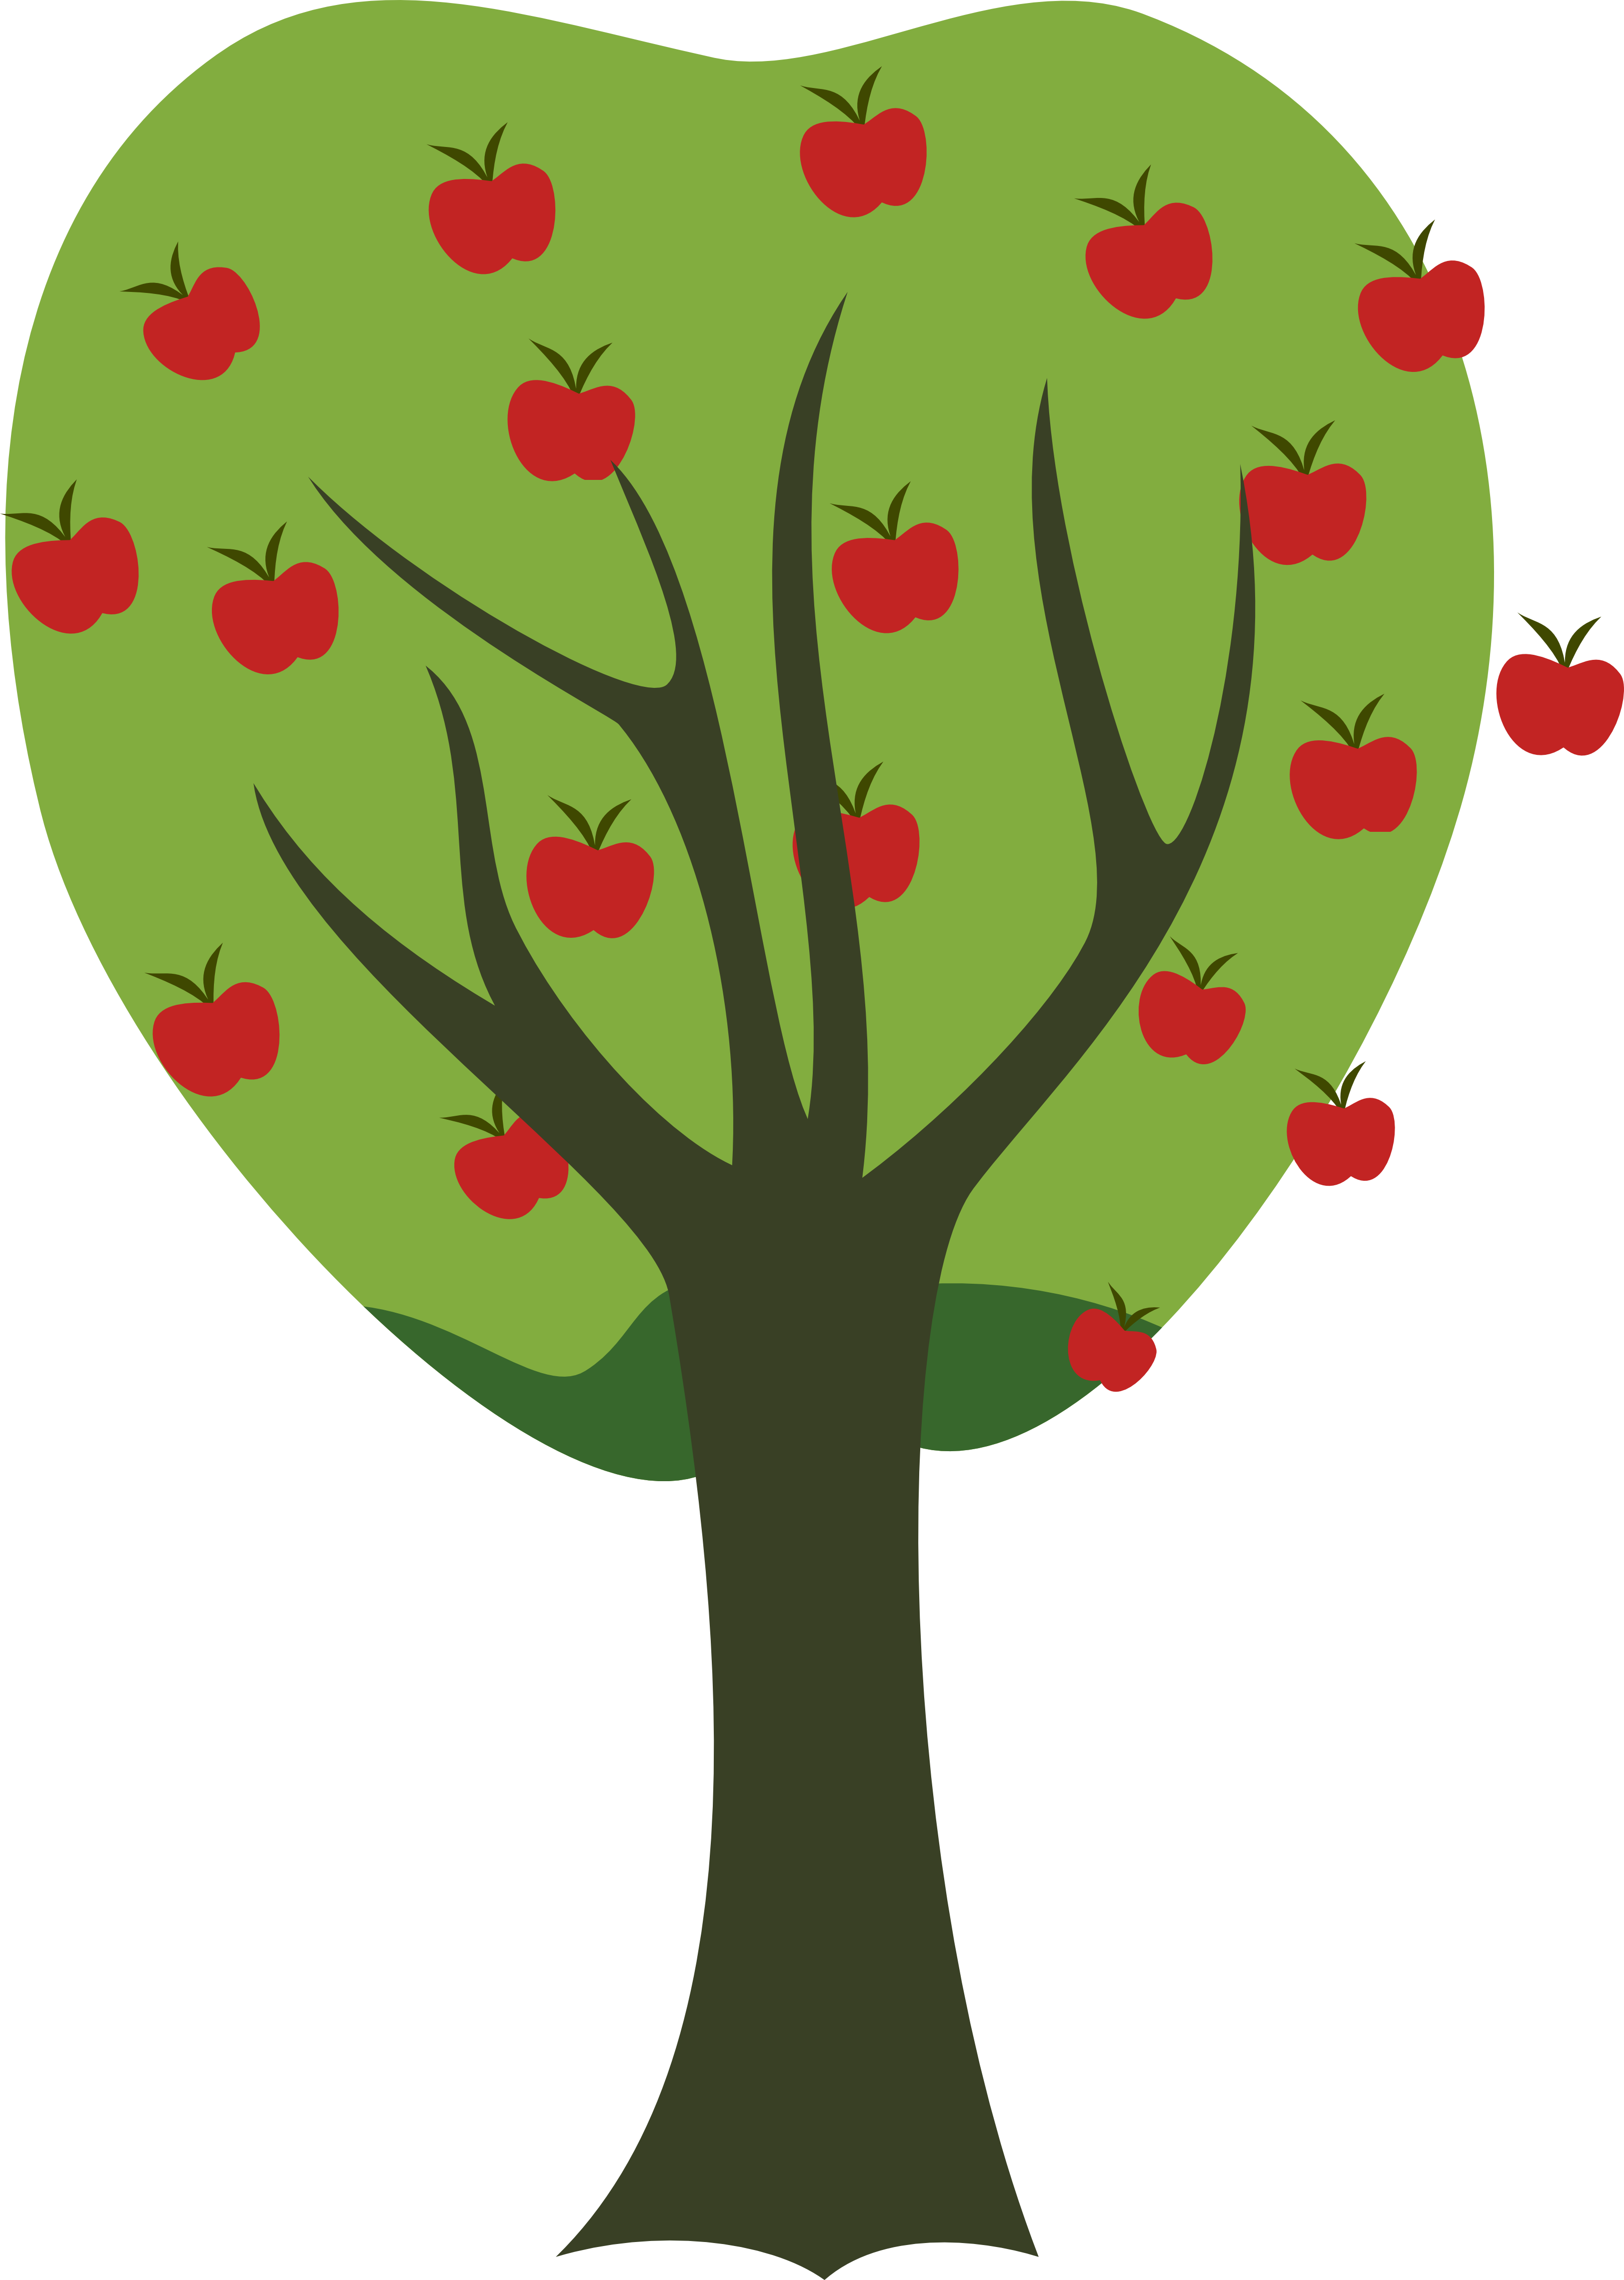 Picture Of A Apple Tree | Free Download Clip Art | Free Clip Art ...